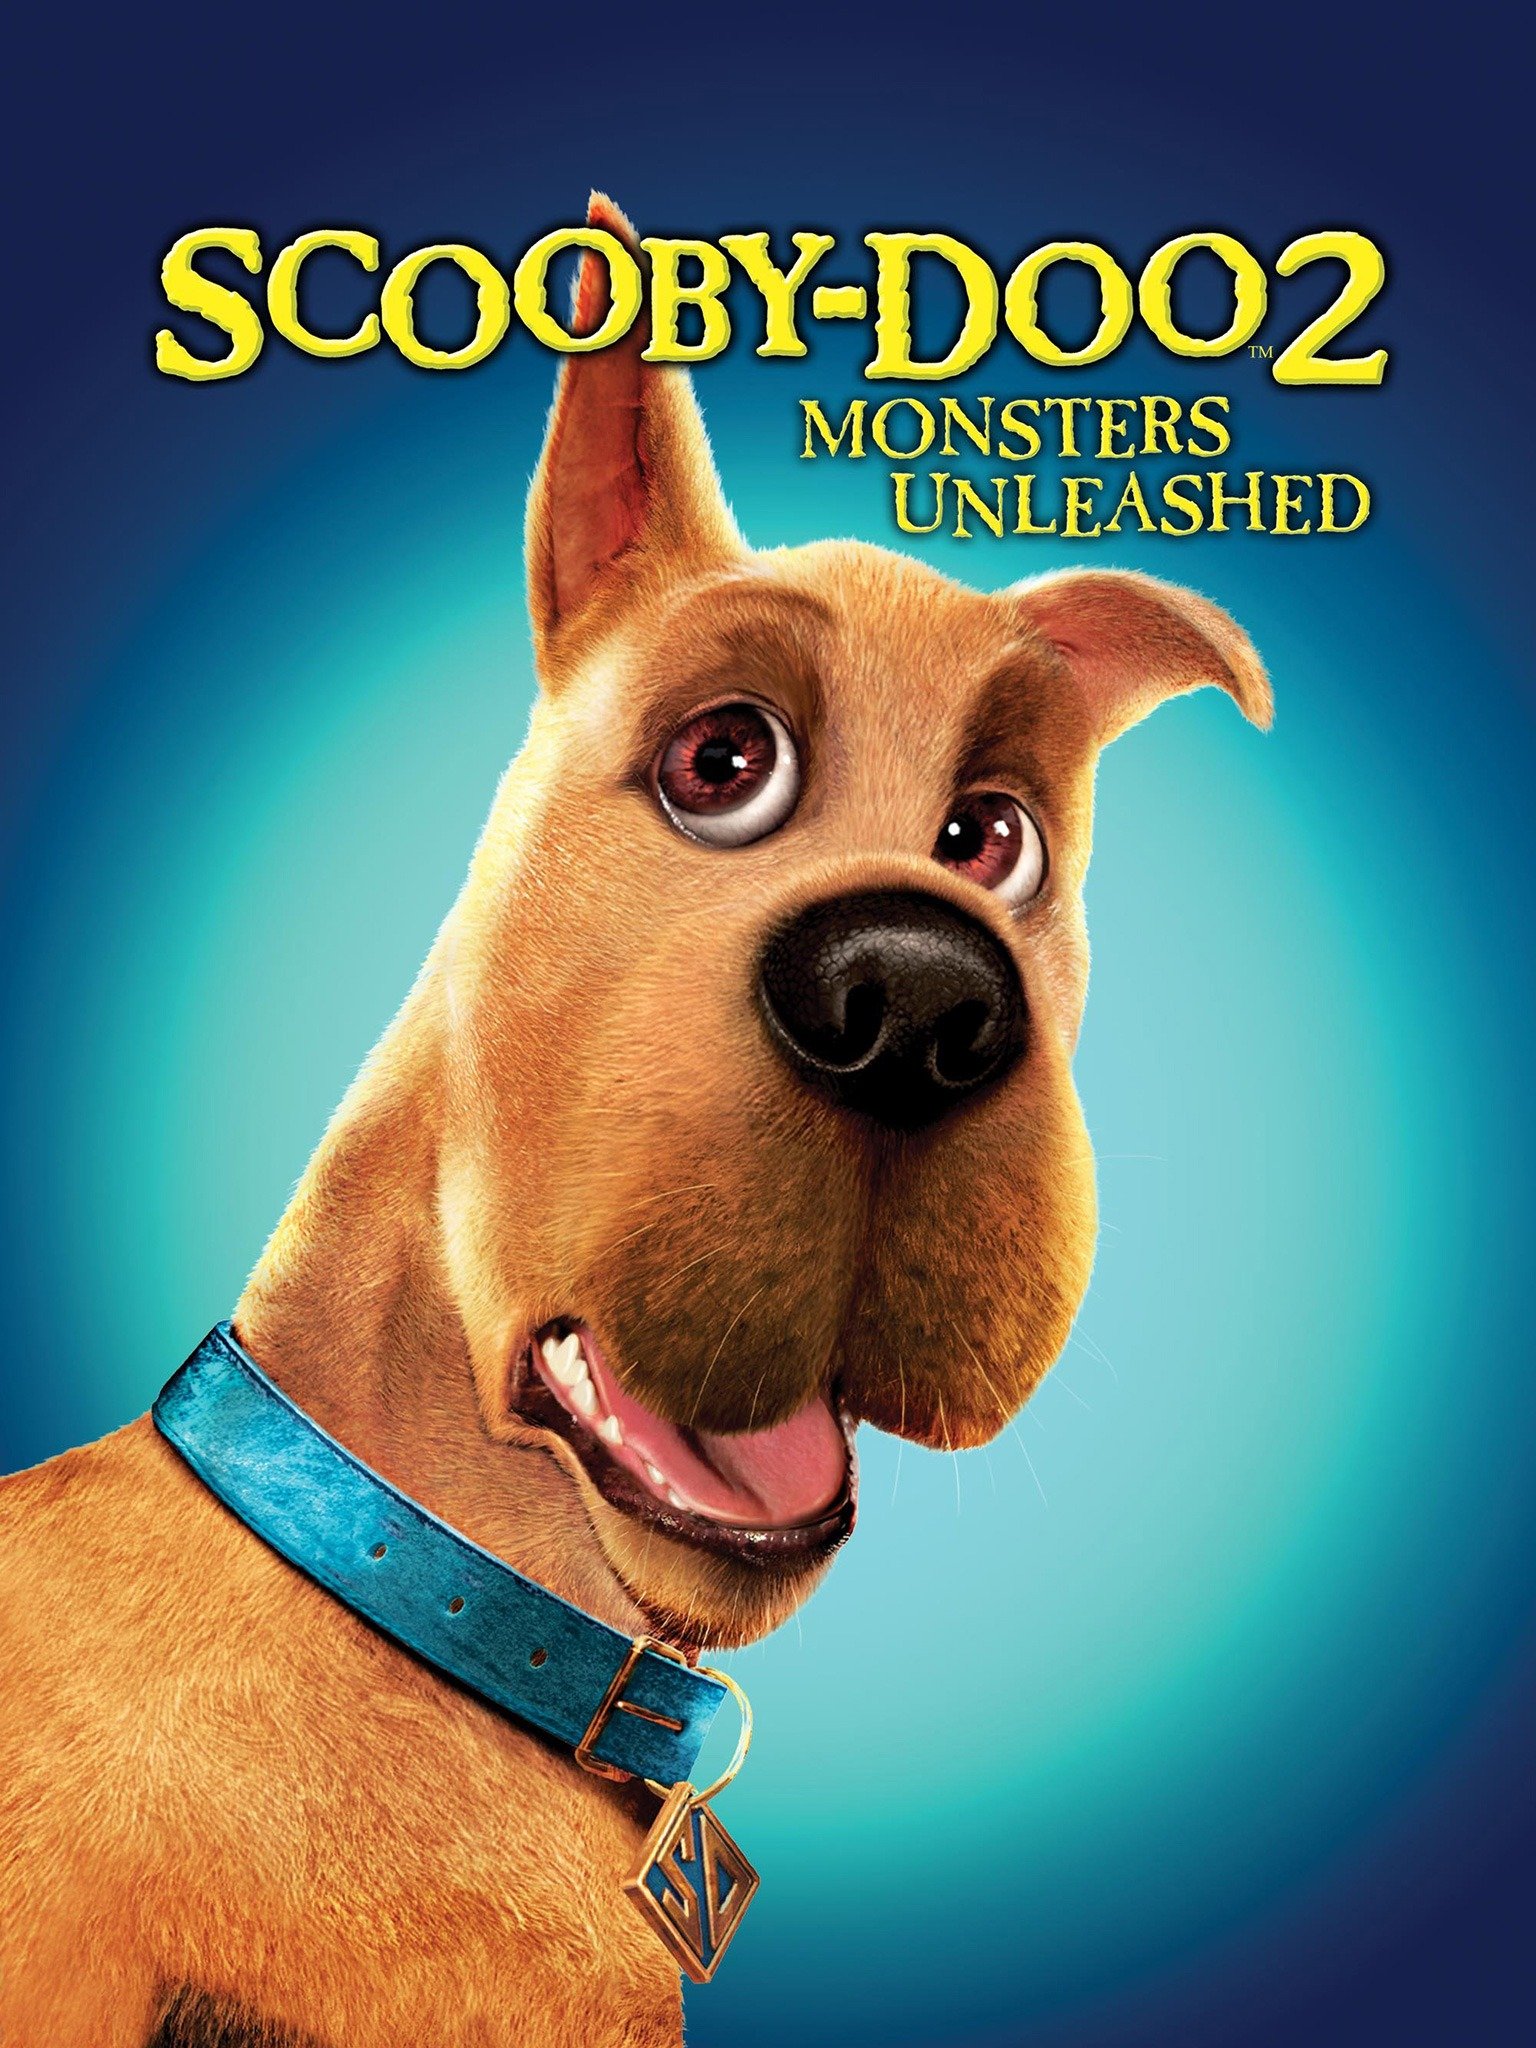 Scooby doo 2 monsters unleashed intro eugost